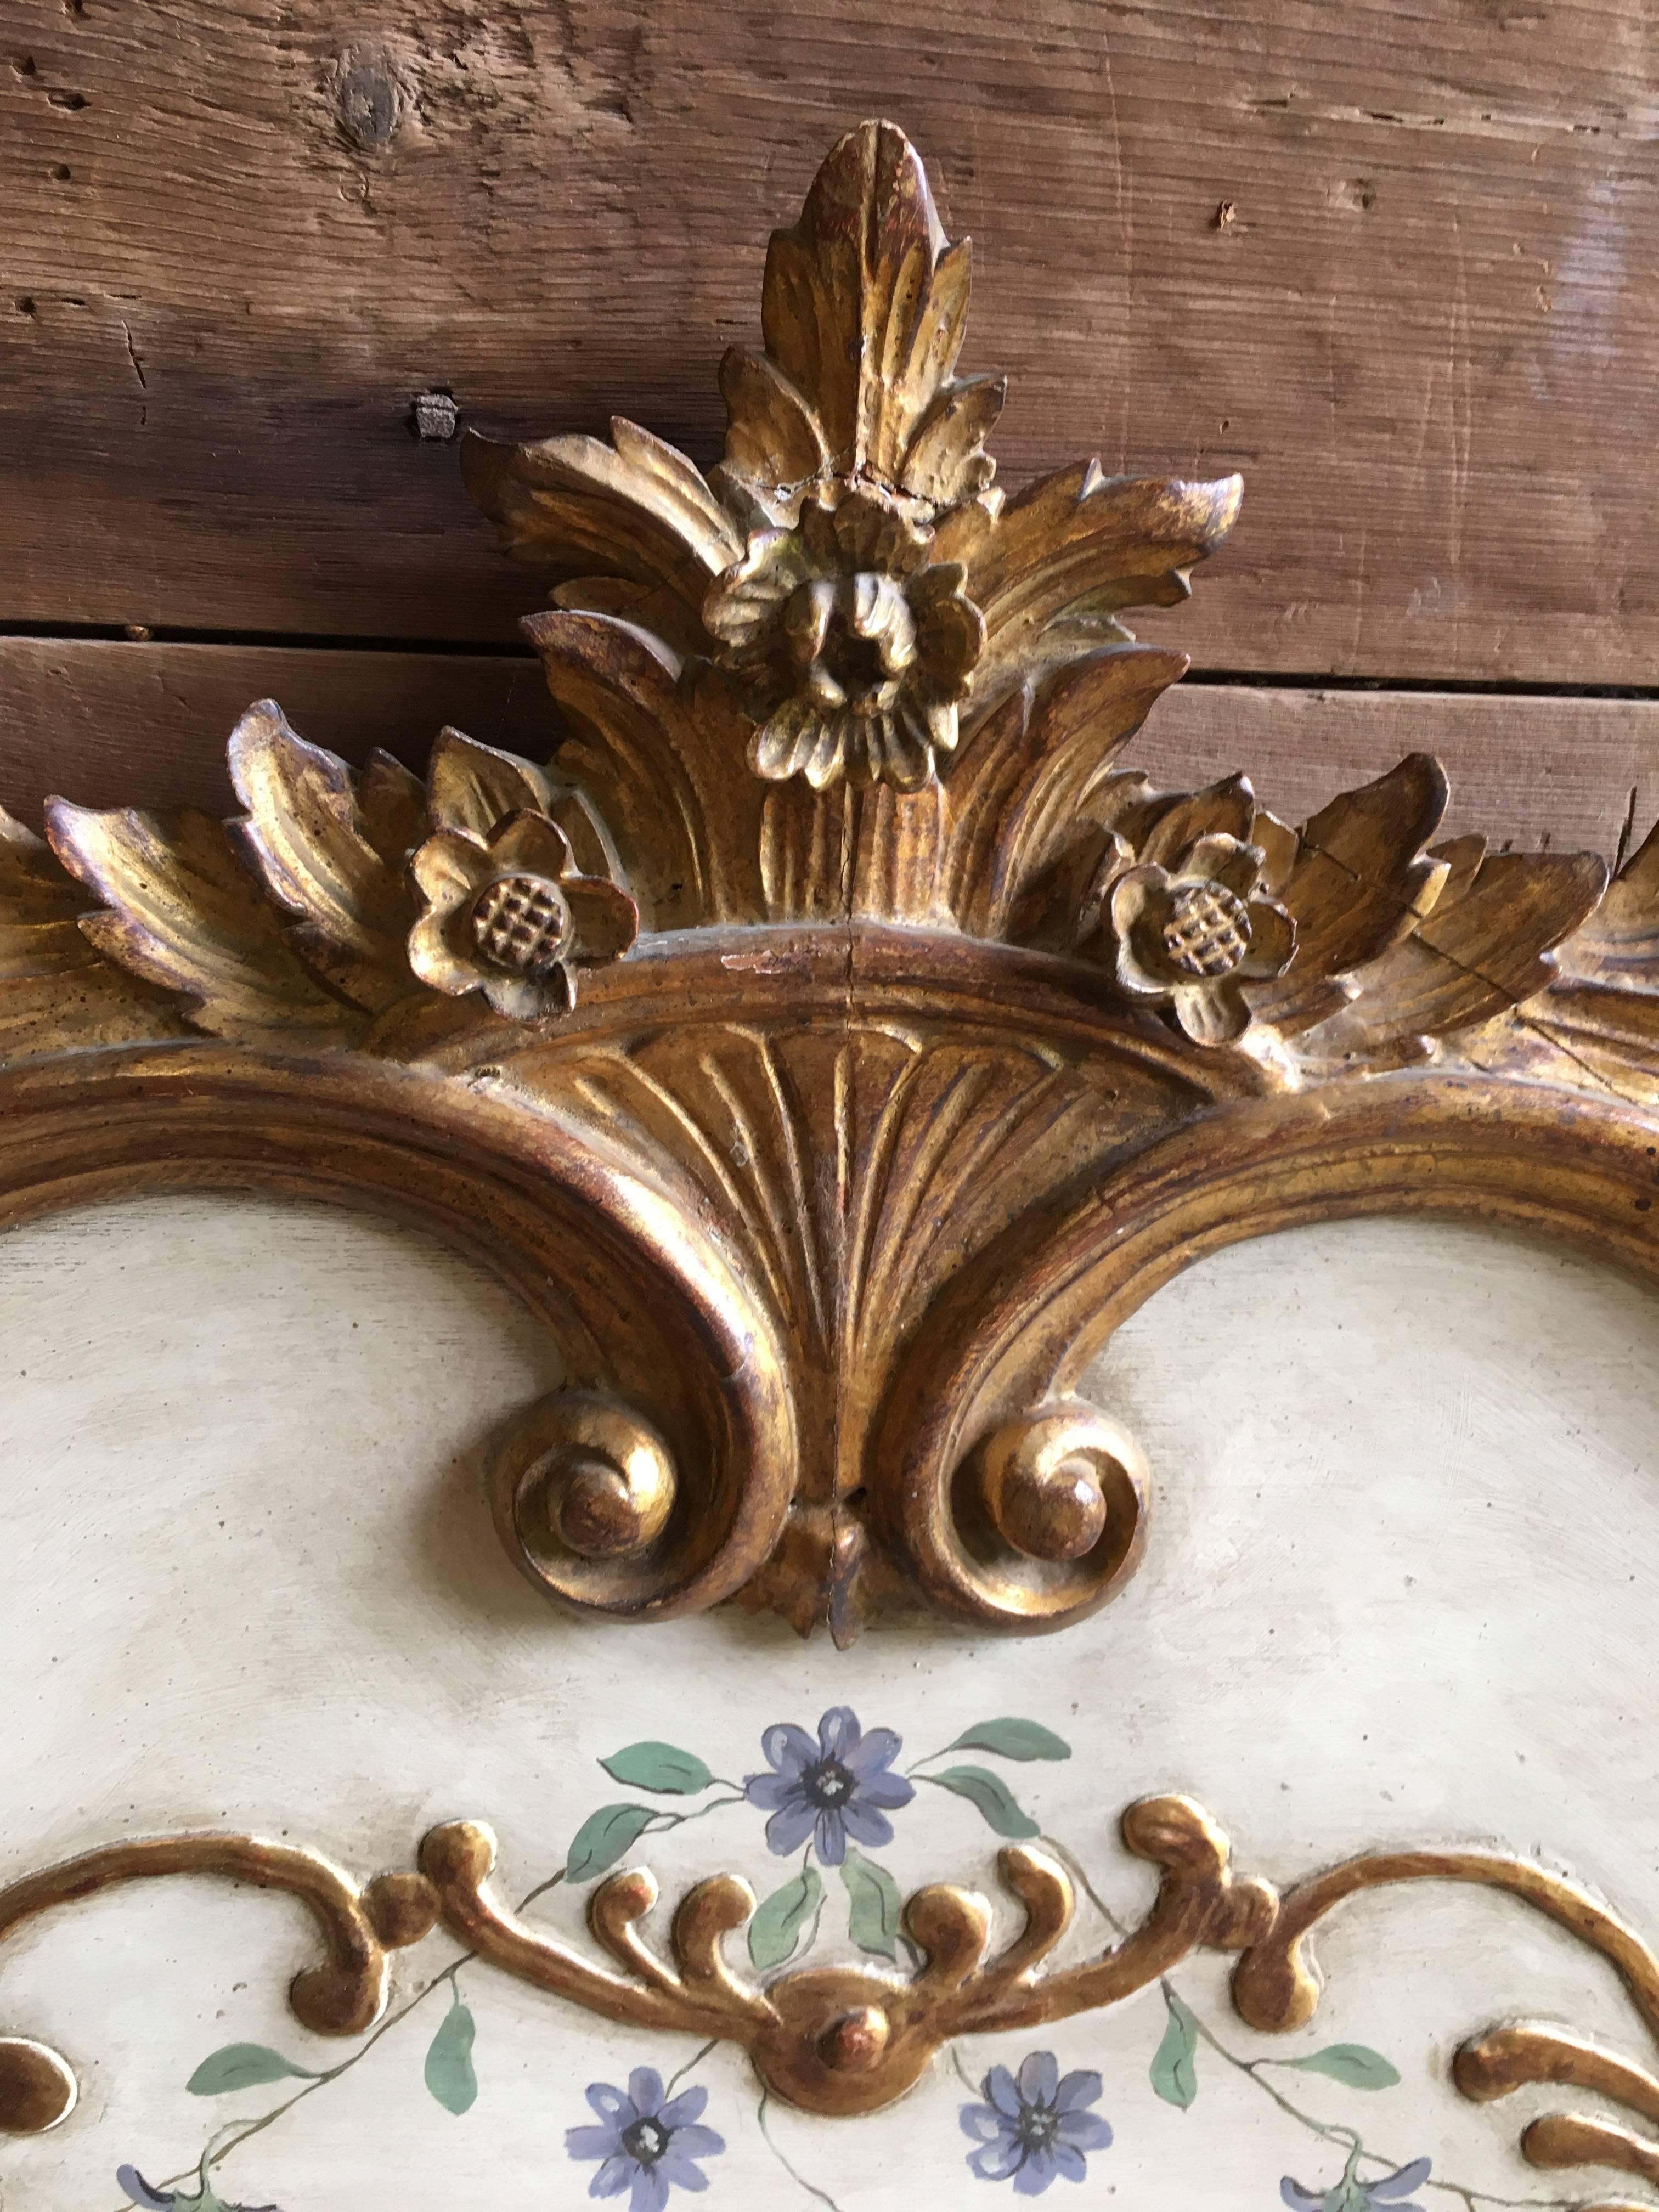 An elaborately carved and gilt Louis XV style headboard, king-size, with painted and gilt floral decoration, mid-late 20th century, Italian. The carved gilt-wood crest can be removed to allow for the headboard to be upholstered and the crest put